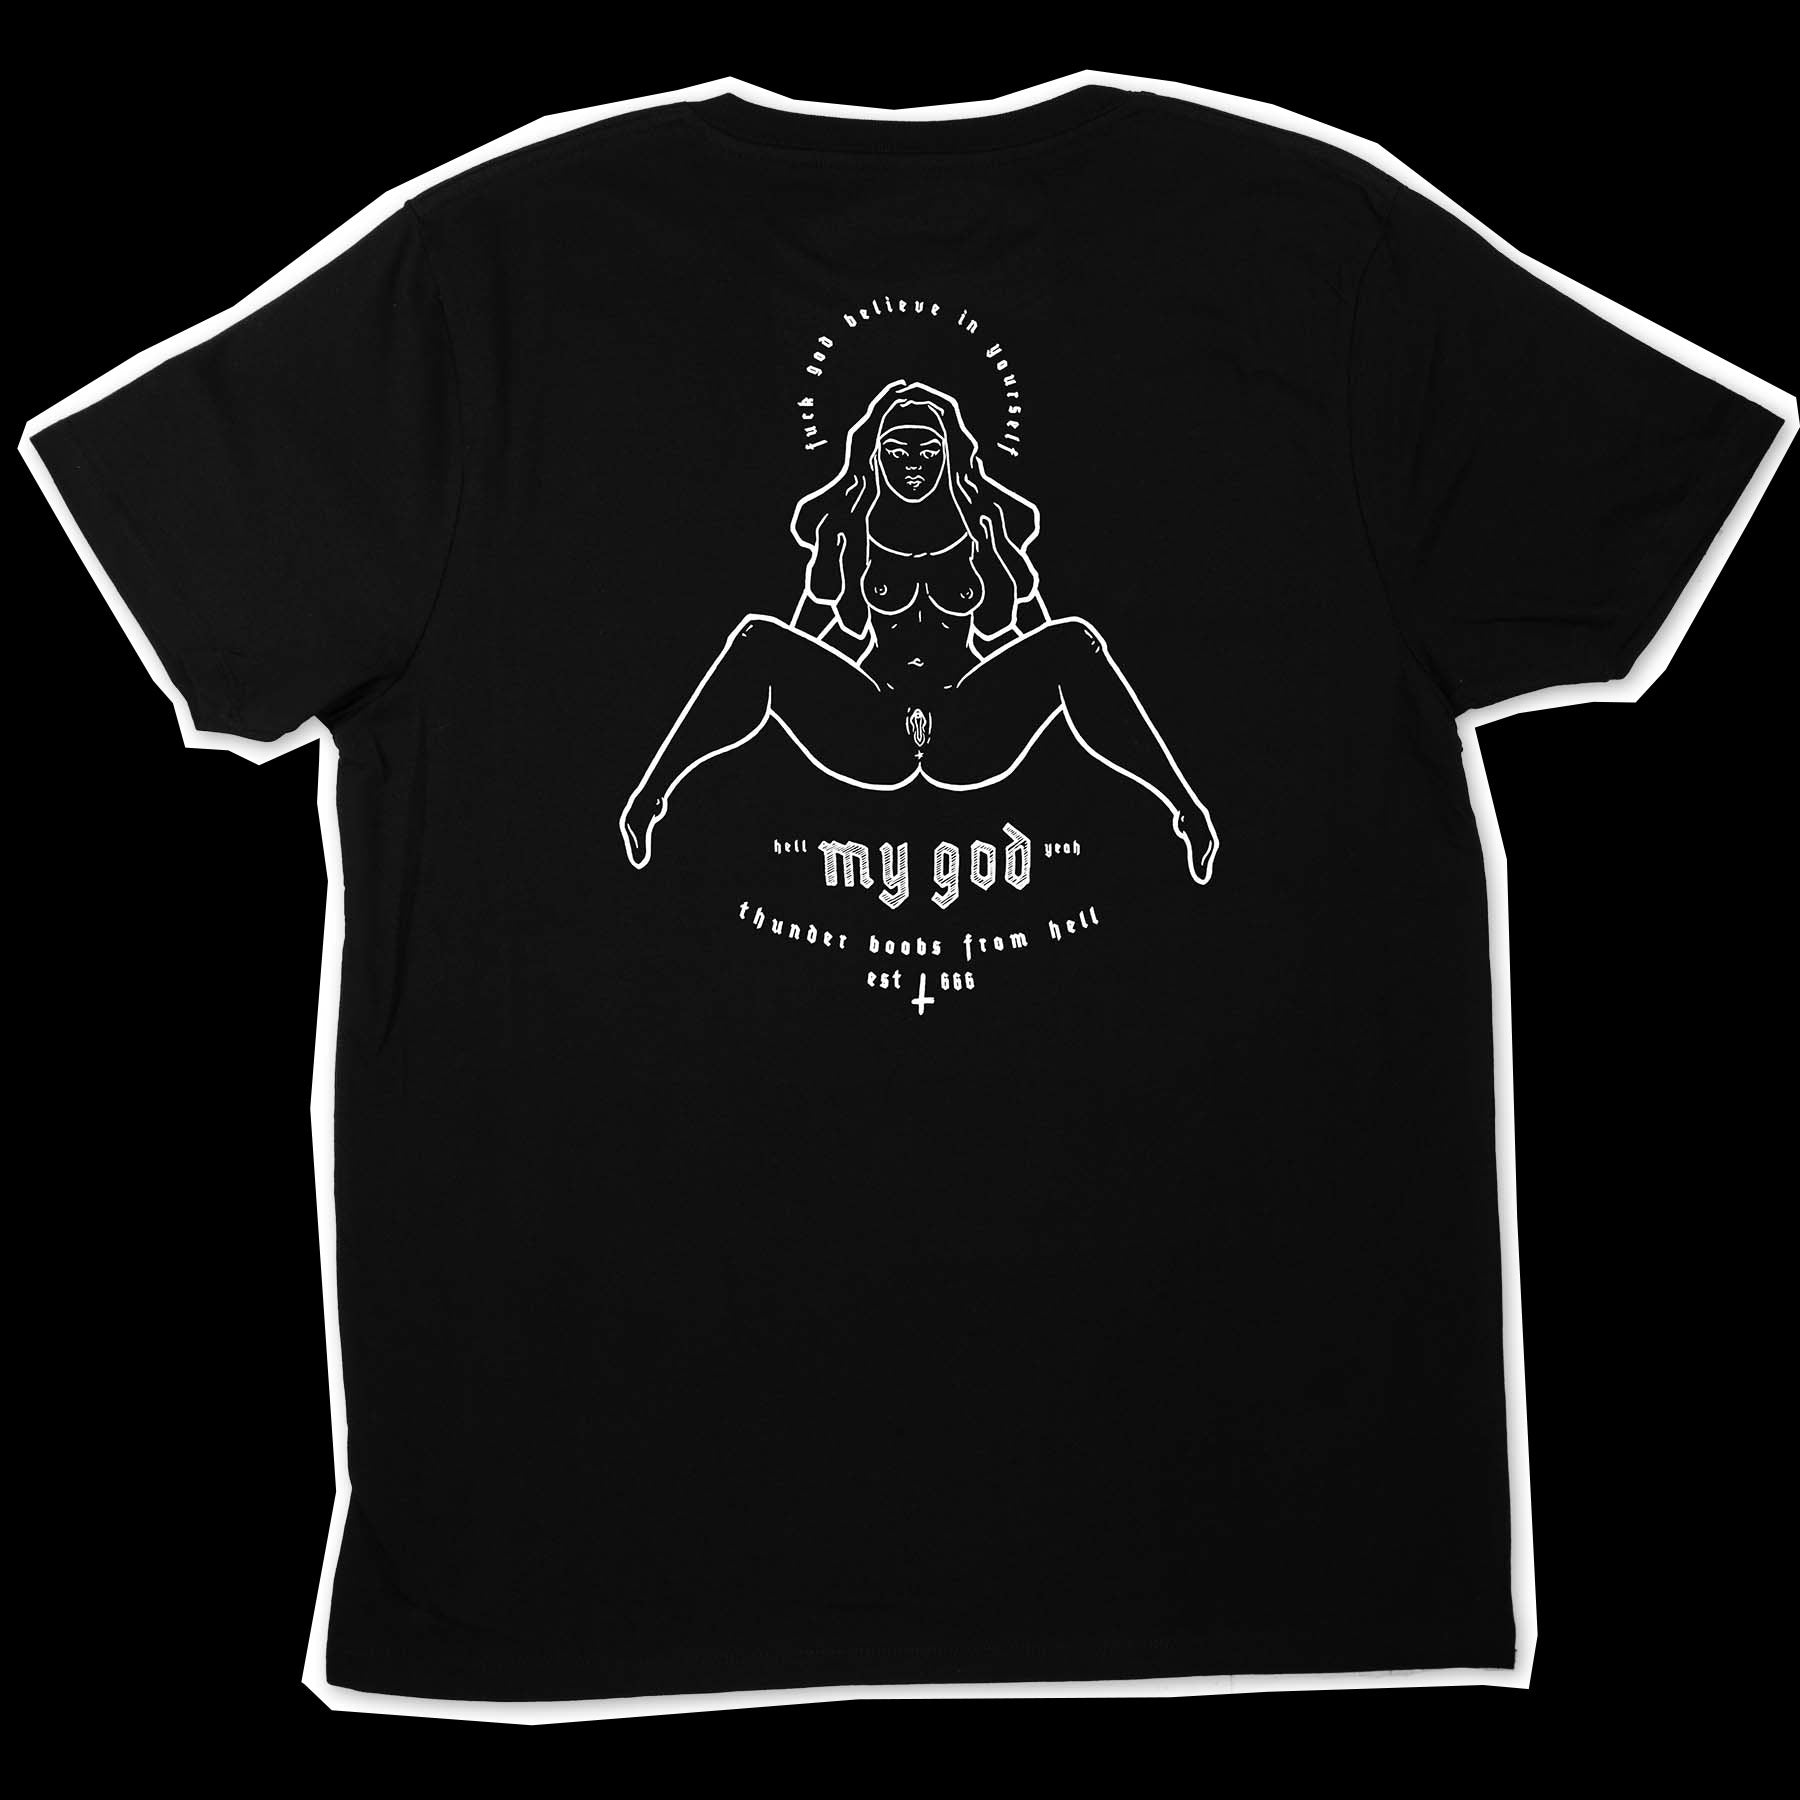 Black t-shirt with a white illustration of a nun who is naked. The screen-printing is on the whole back with the text "fuck god believe in yourself" and "thunder boobs from hell" as well as "hell yeah my god"